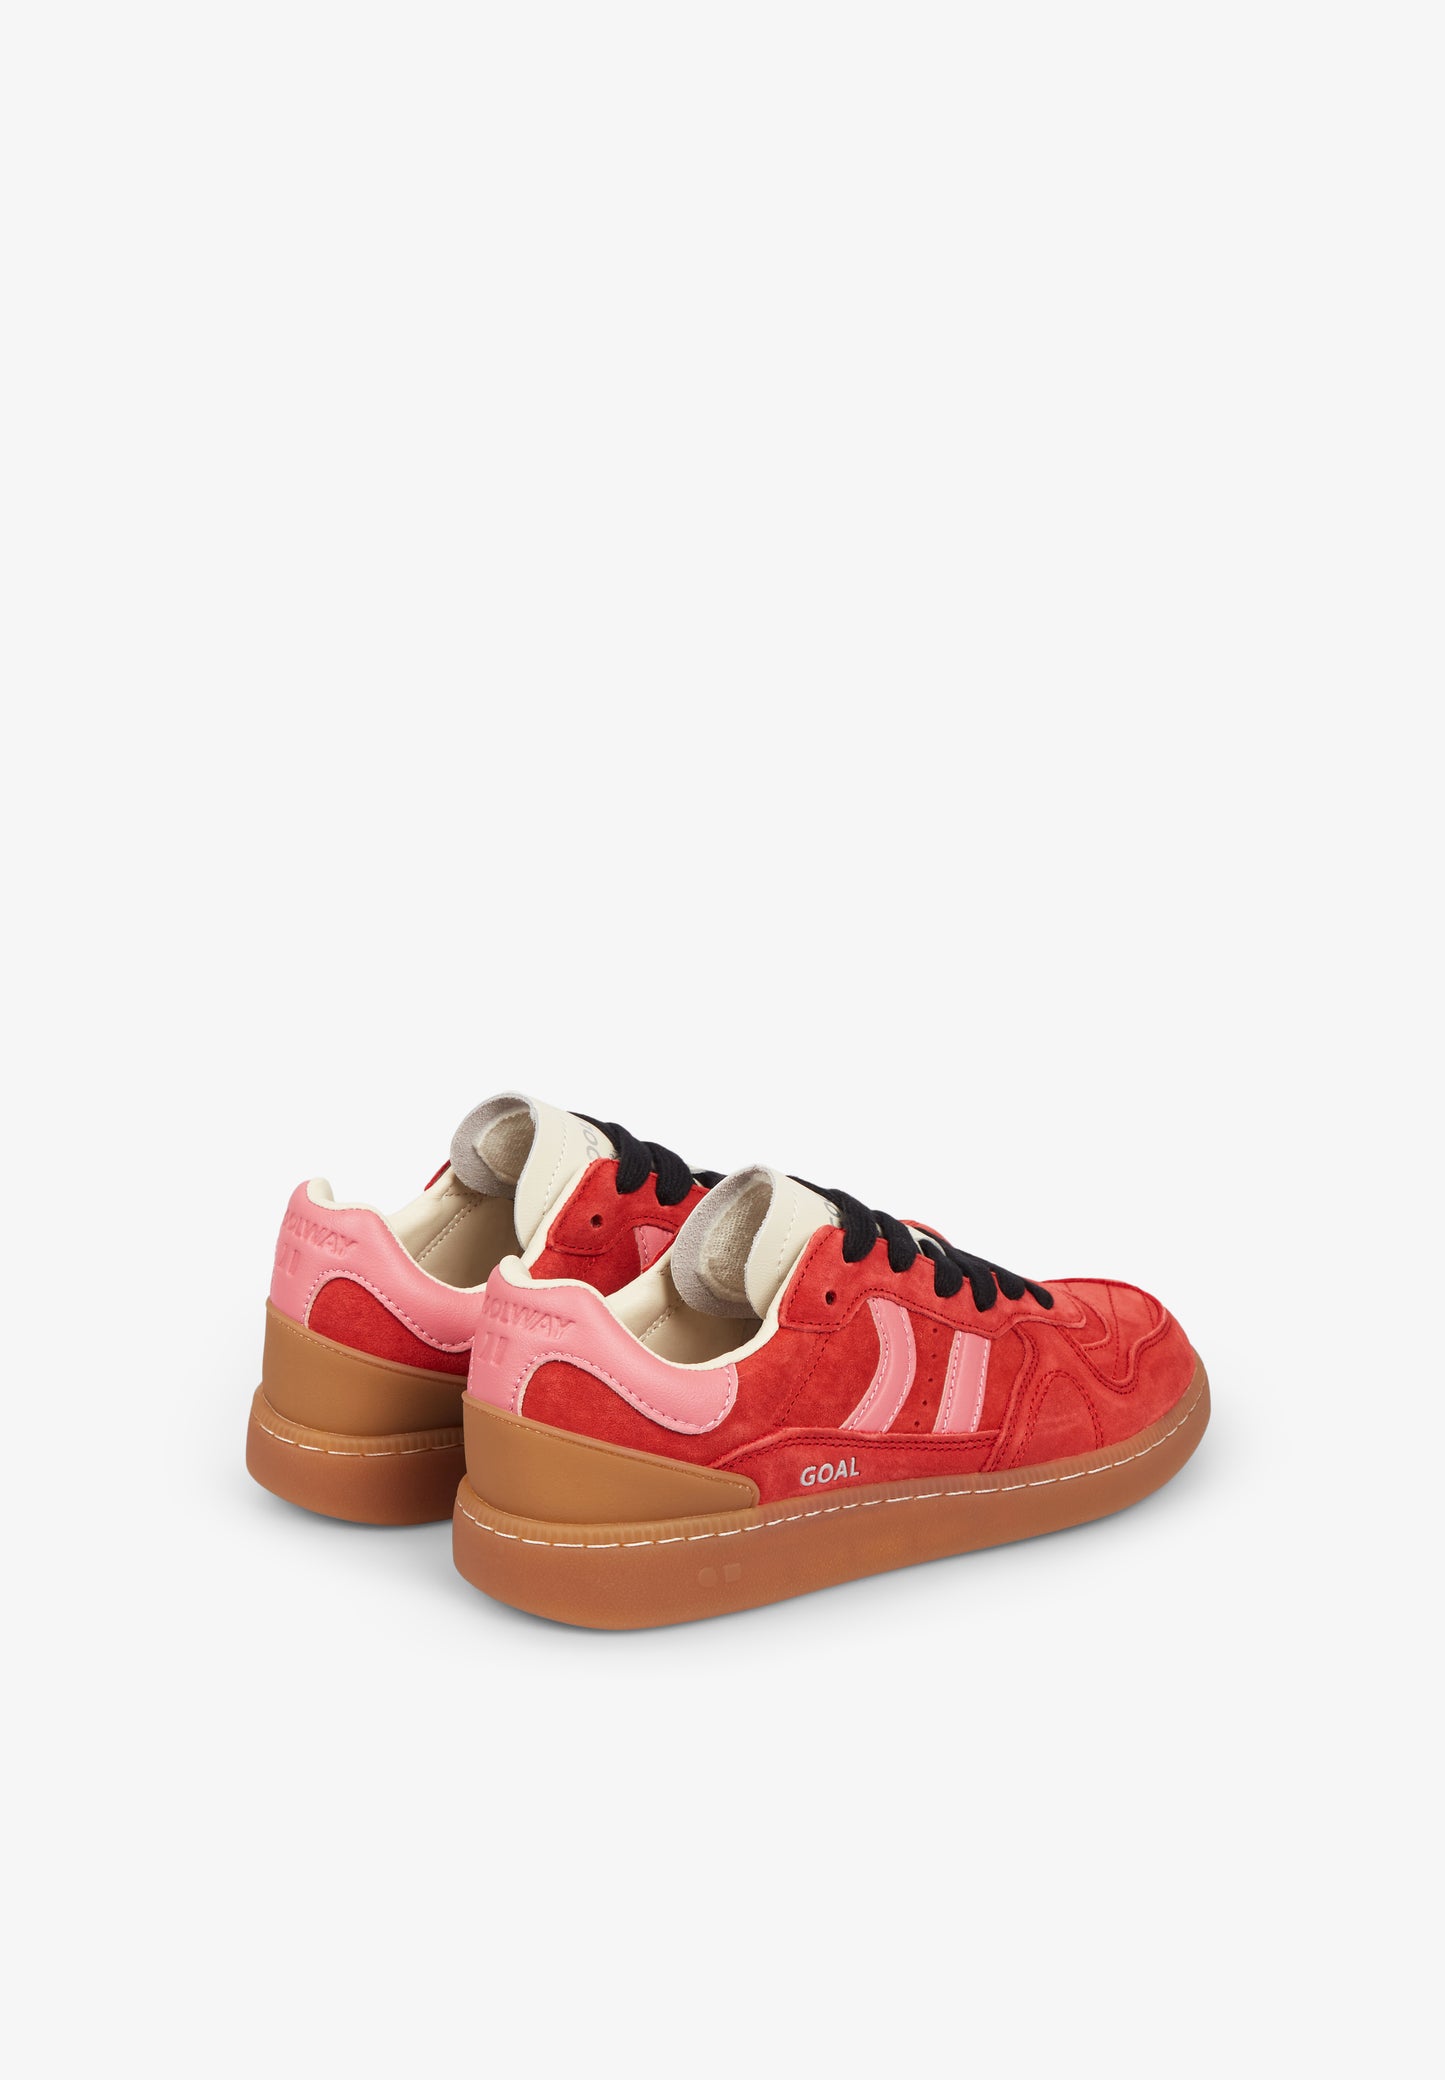 COOLWAY | SNEAKERS GOAL MUJER